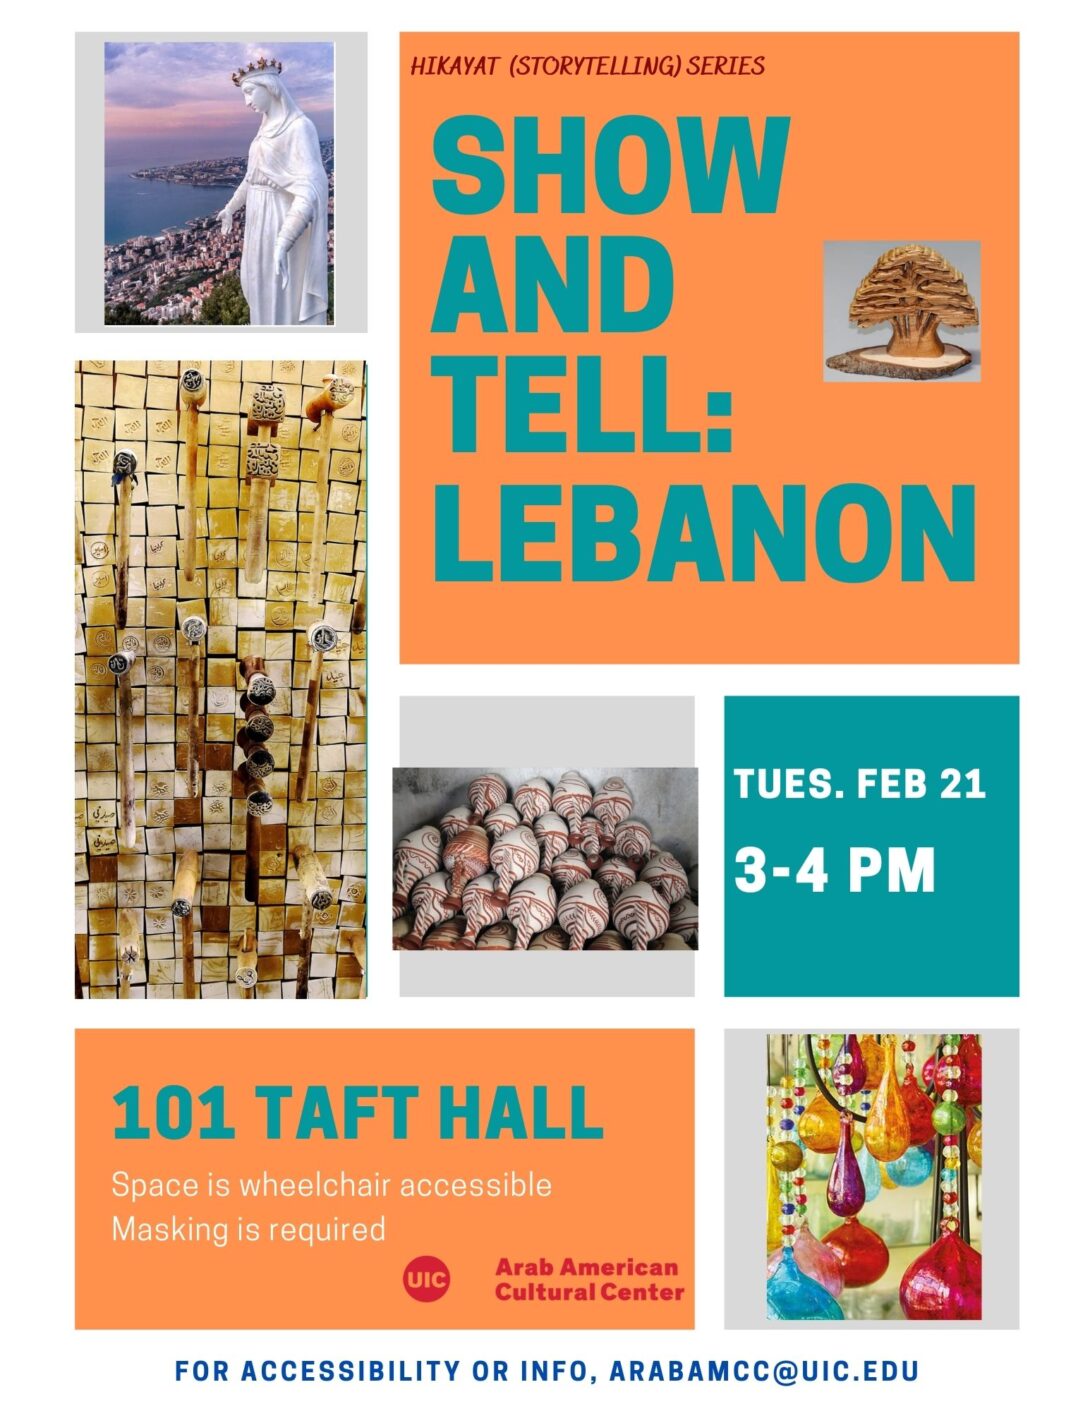 Flyer organized in squares and rectangles with light orange and teal backgrounds and text in teal and white. Five photos are included: statue of the lady of Lebanon overlooking a valley and sea, a stack of soap and soap molds, a group of clay water jugs decorated in red, colorful handmade glass ornaments.